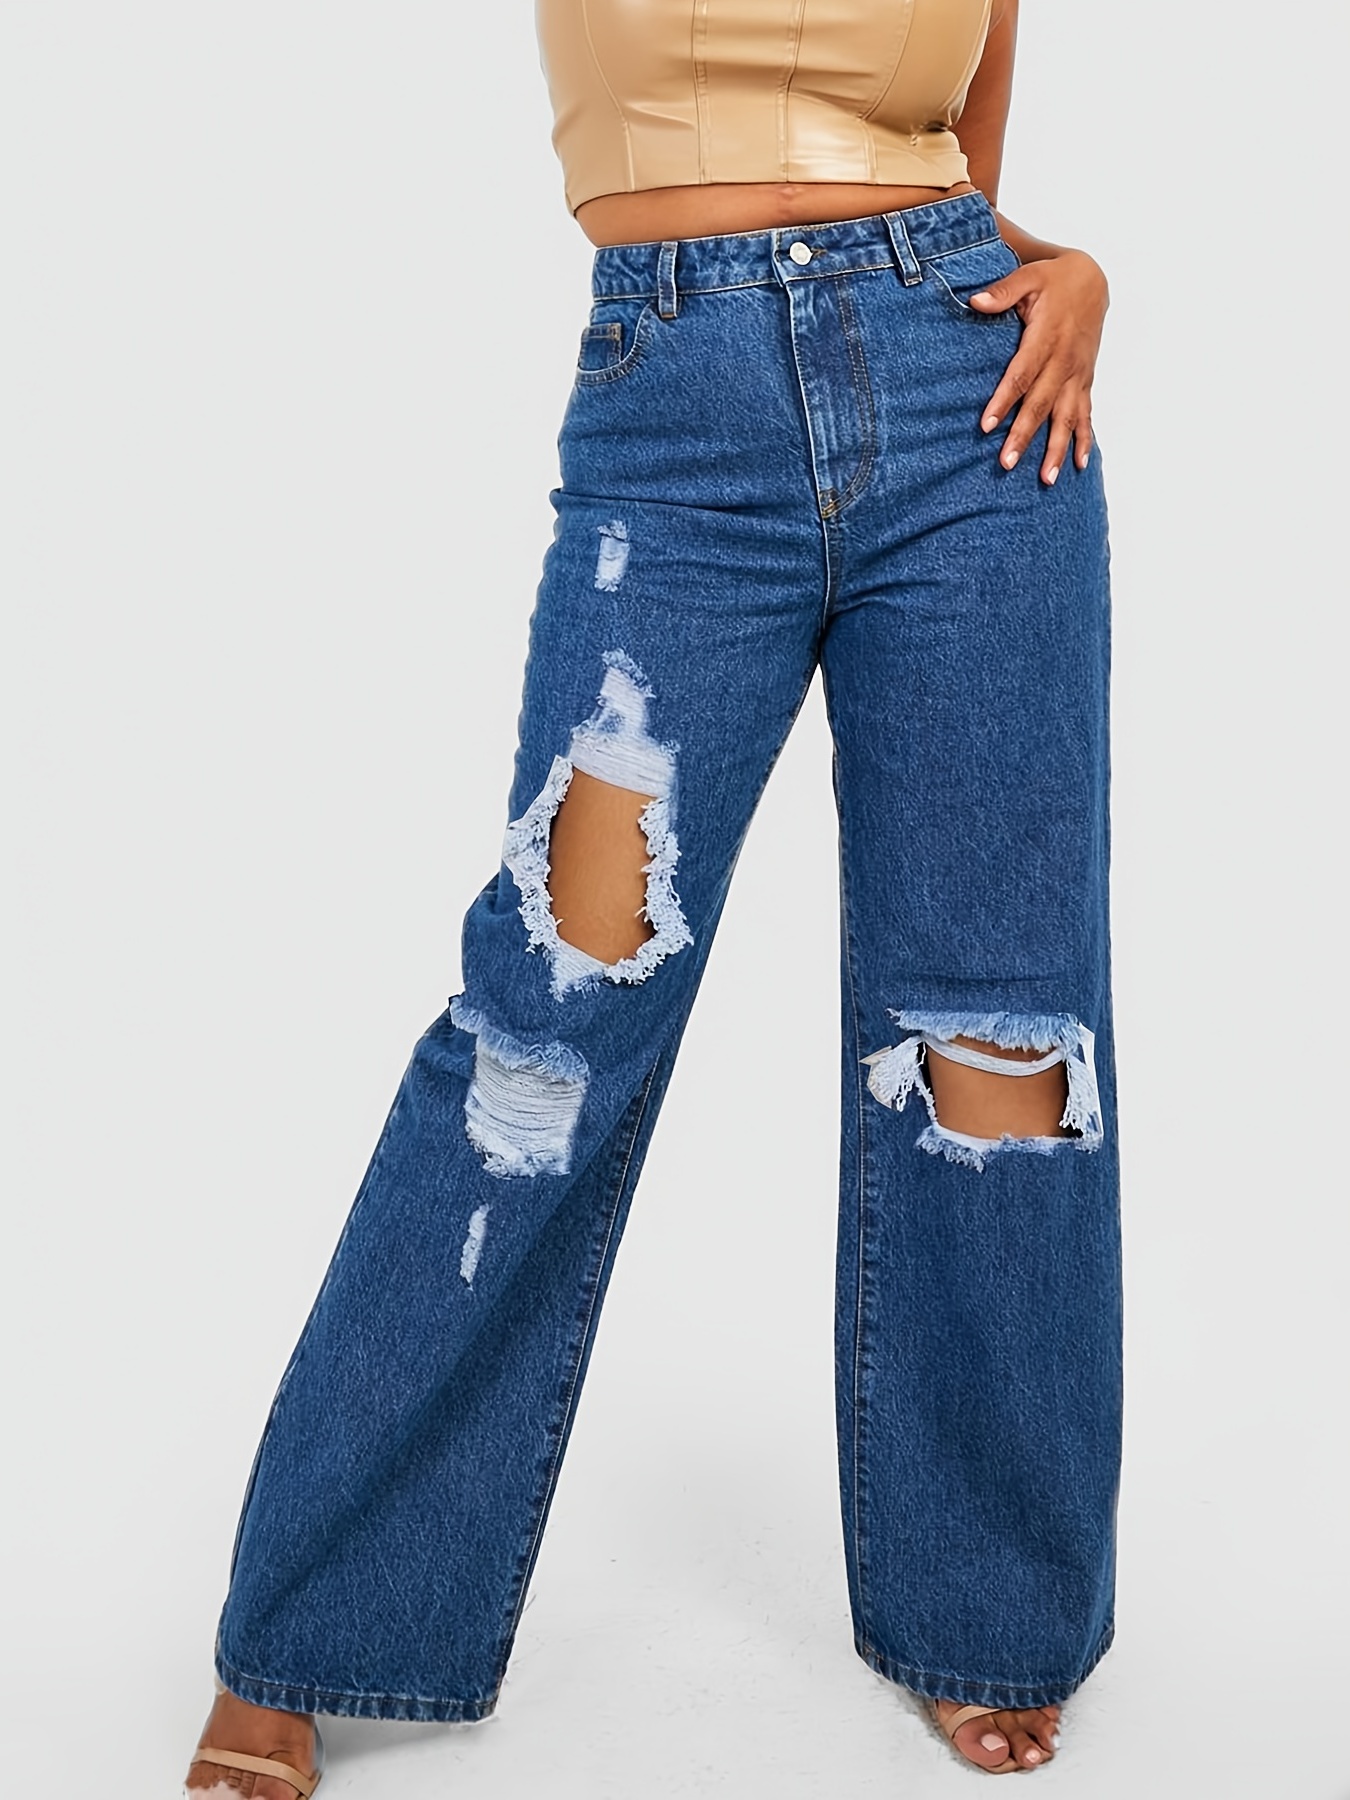 High Rise Straight Legs Loose Baggy Fit Ripped Knees Cut Out Front Wide Legs  Distressed Light Blue Boyfriend Jeans Pants, Women's Denim Jeans, Women's  Clothing